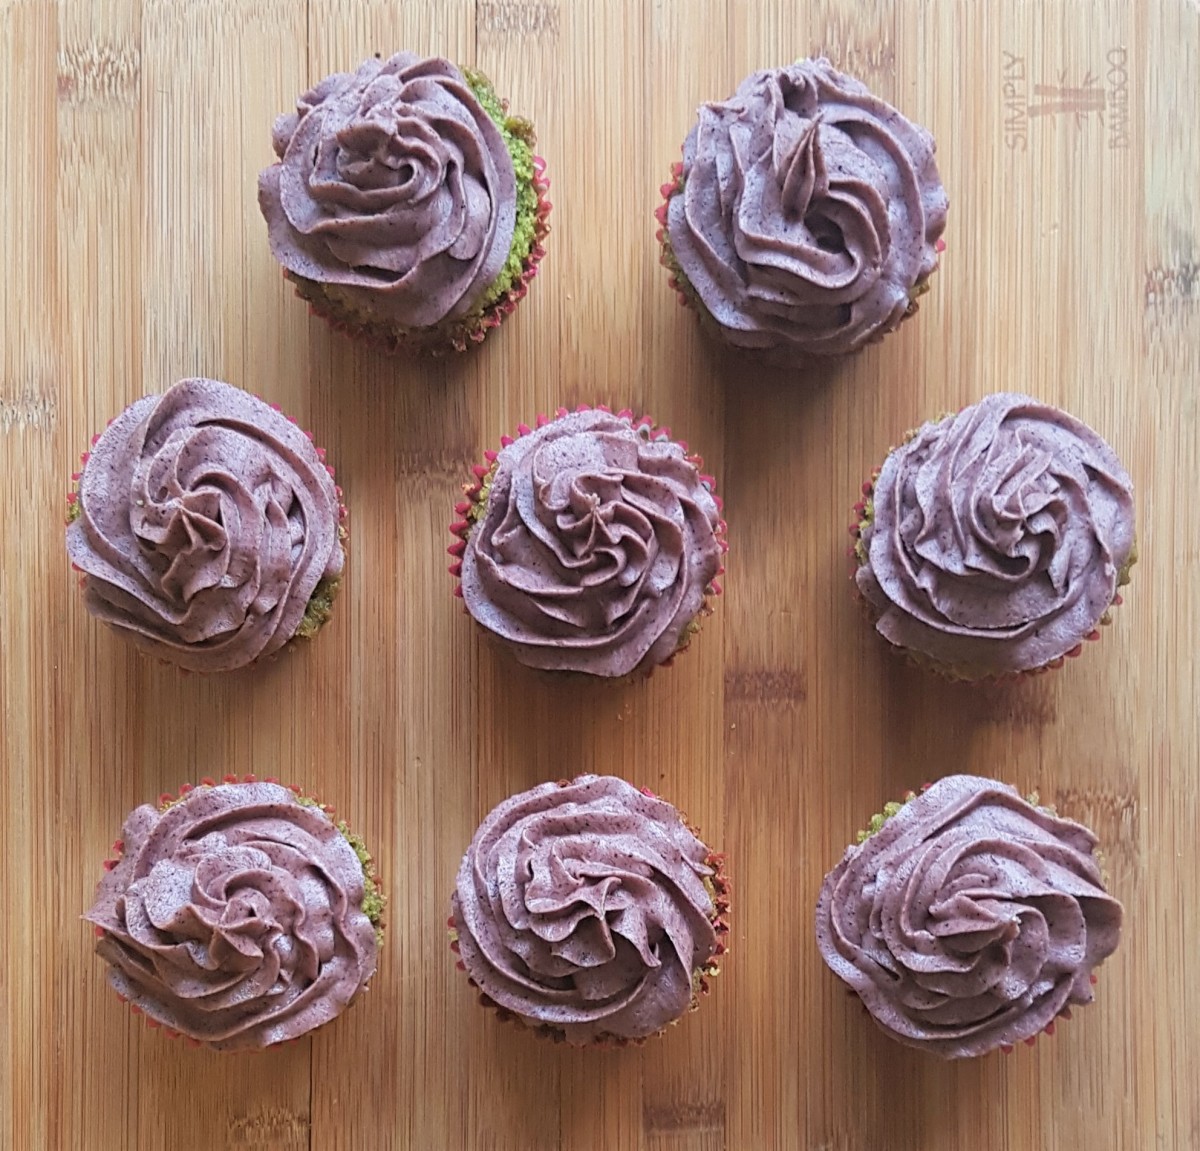 Wheatgrass Cupcakes with Acai Buttercream Frosting